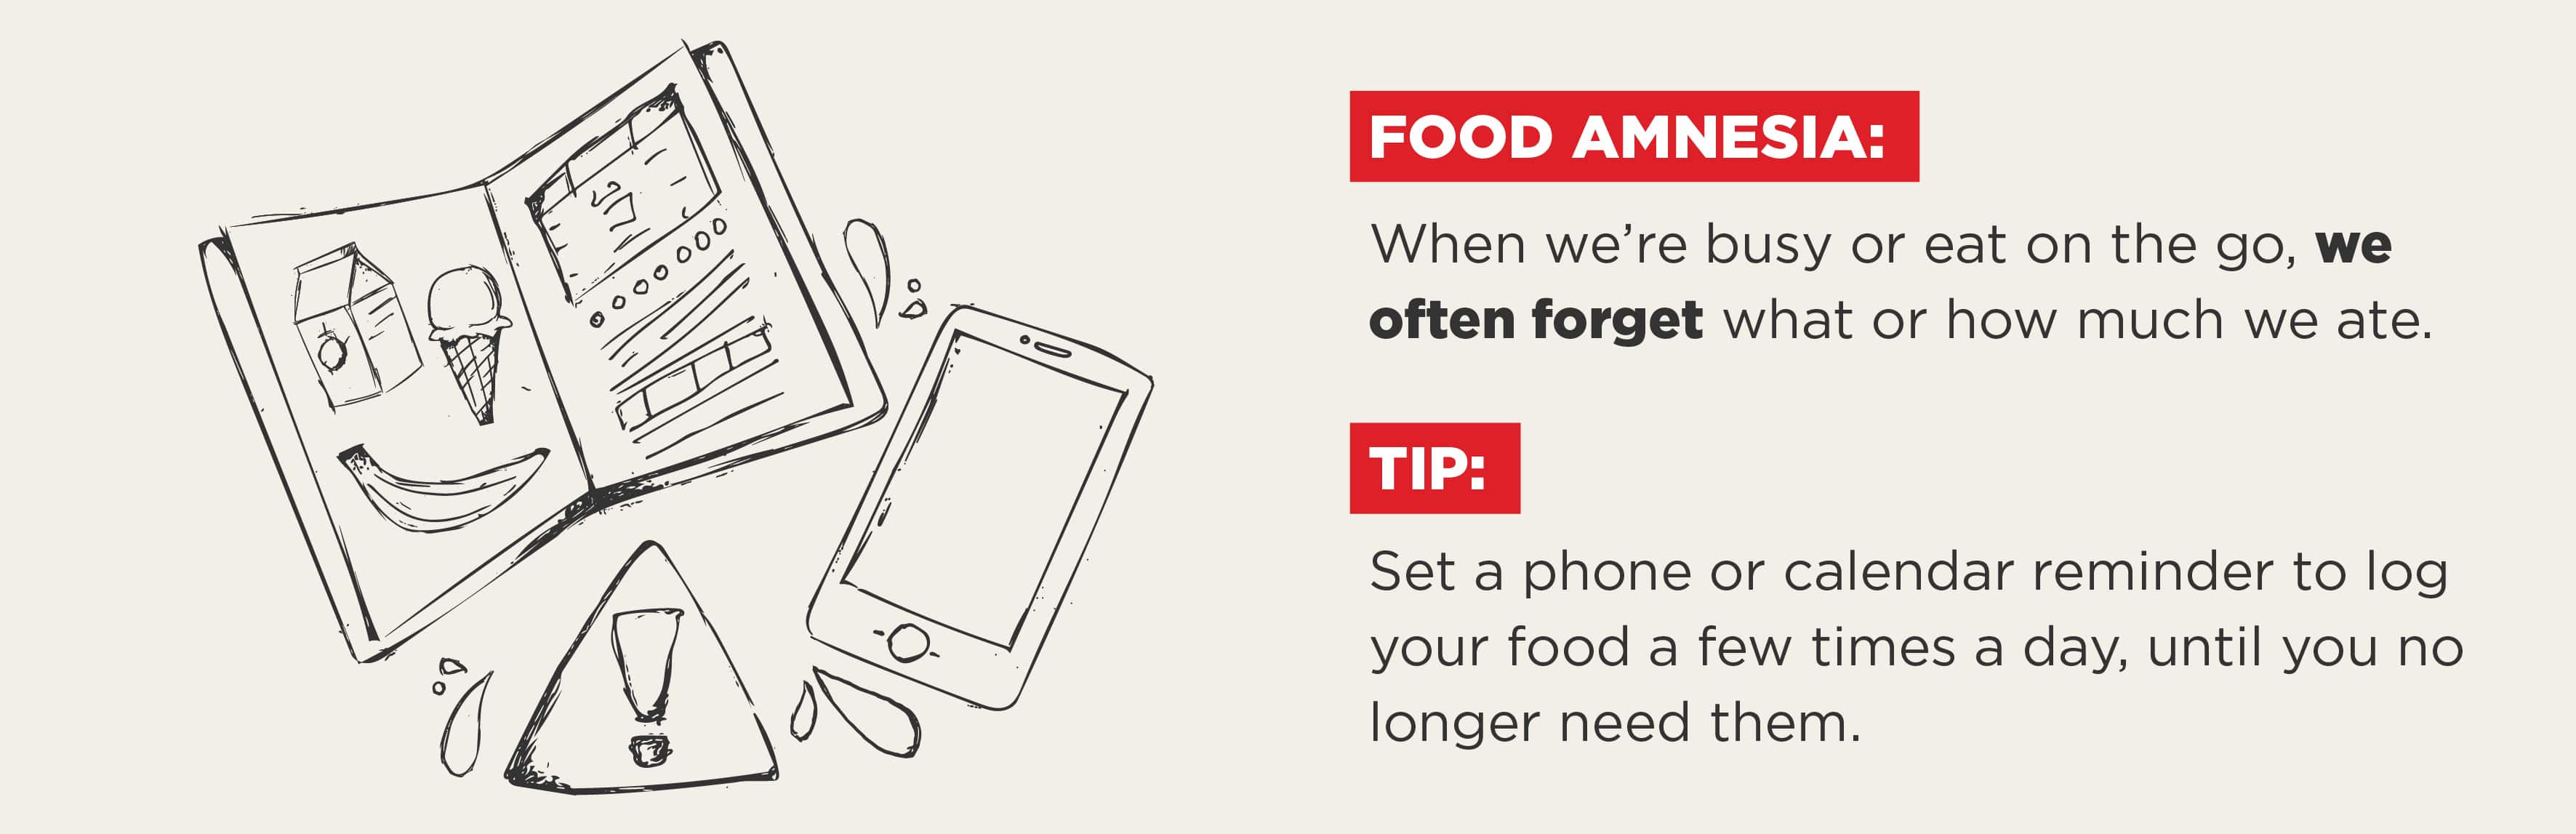 Tip: Set a phone or calendar reminder to log your food a few times a day, until you no longer need them.